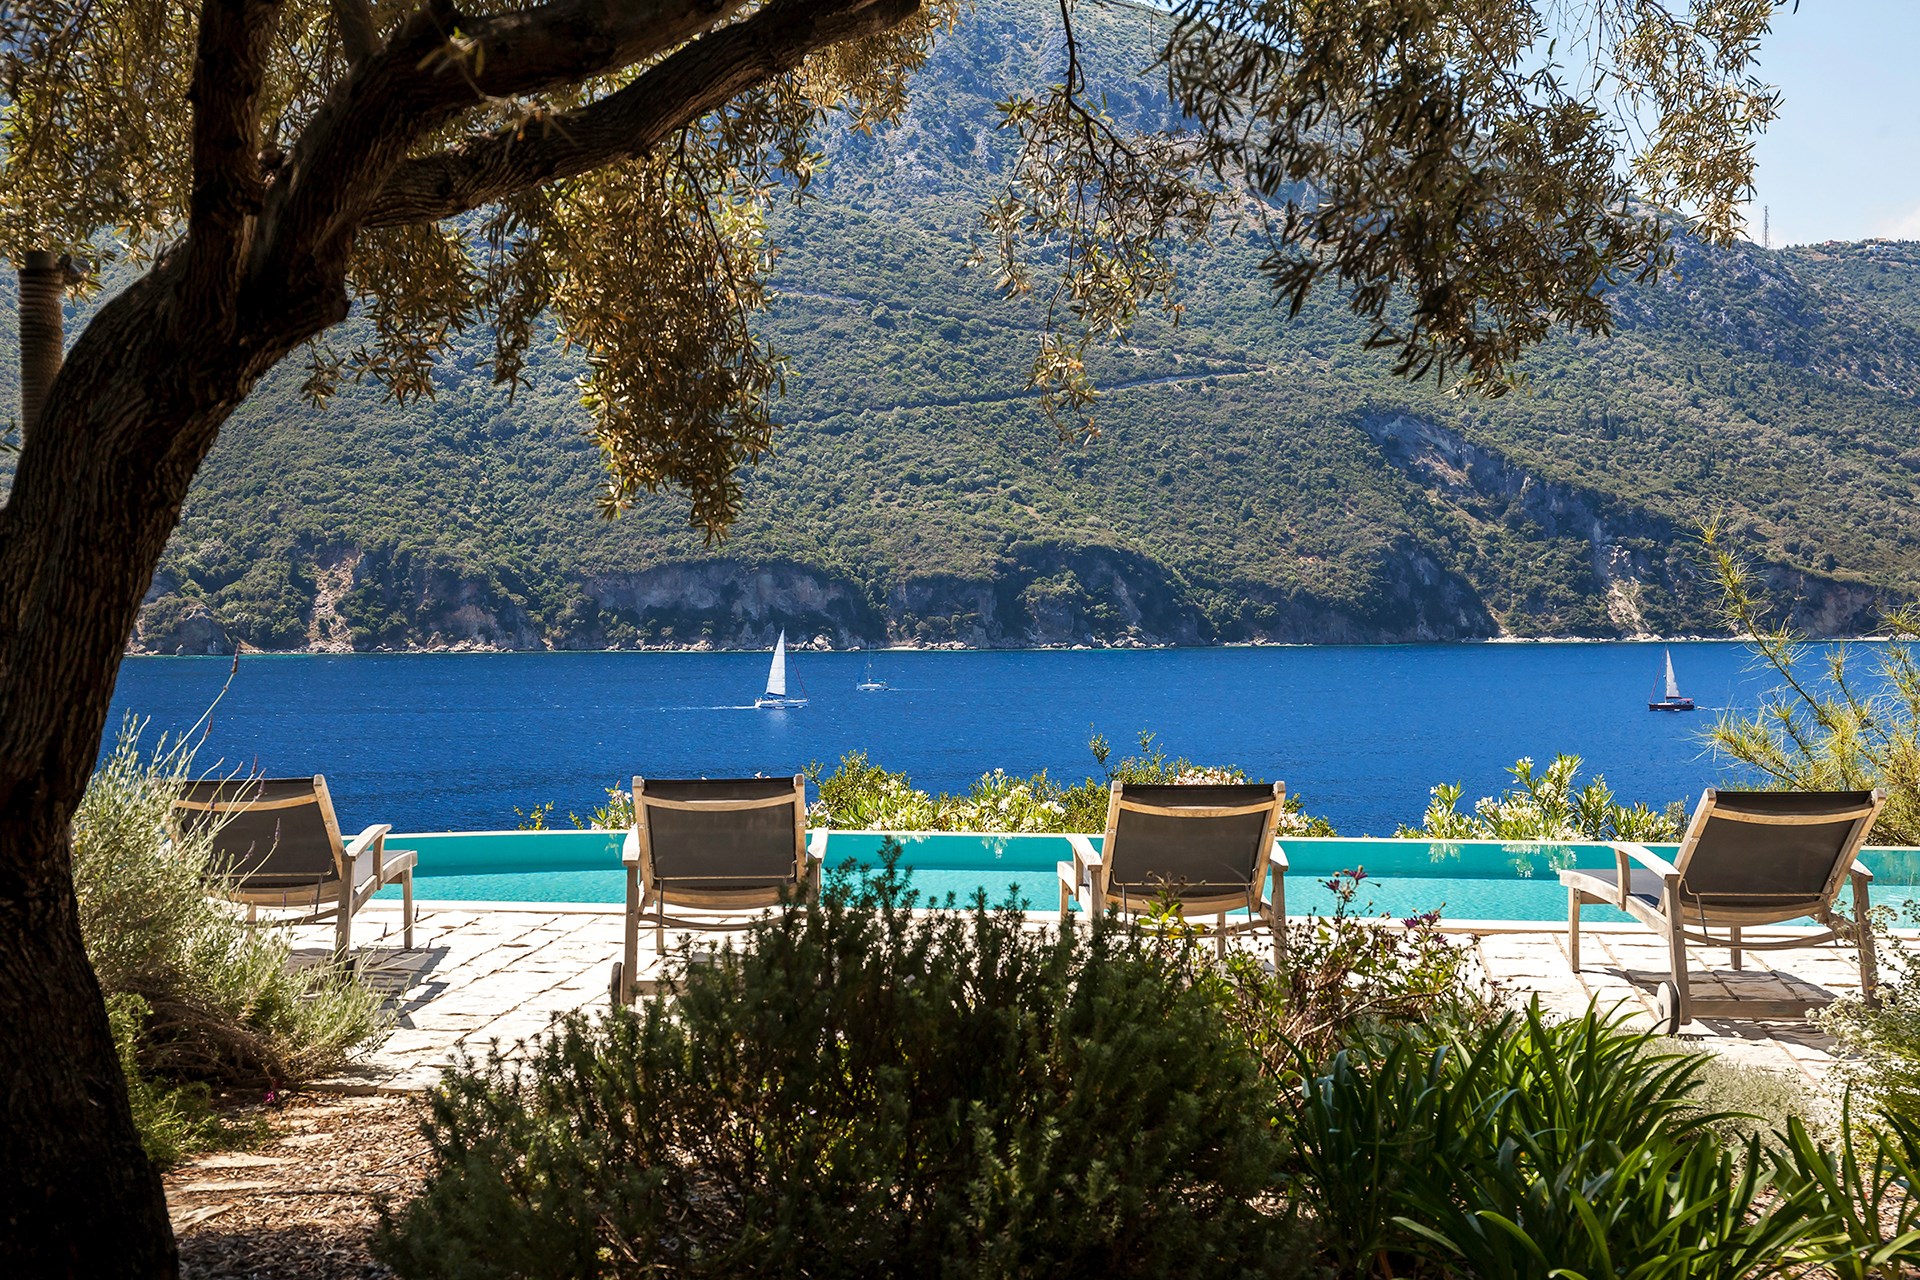 Our exclusive pick of the best luxury villas in Greece